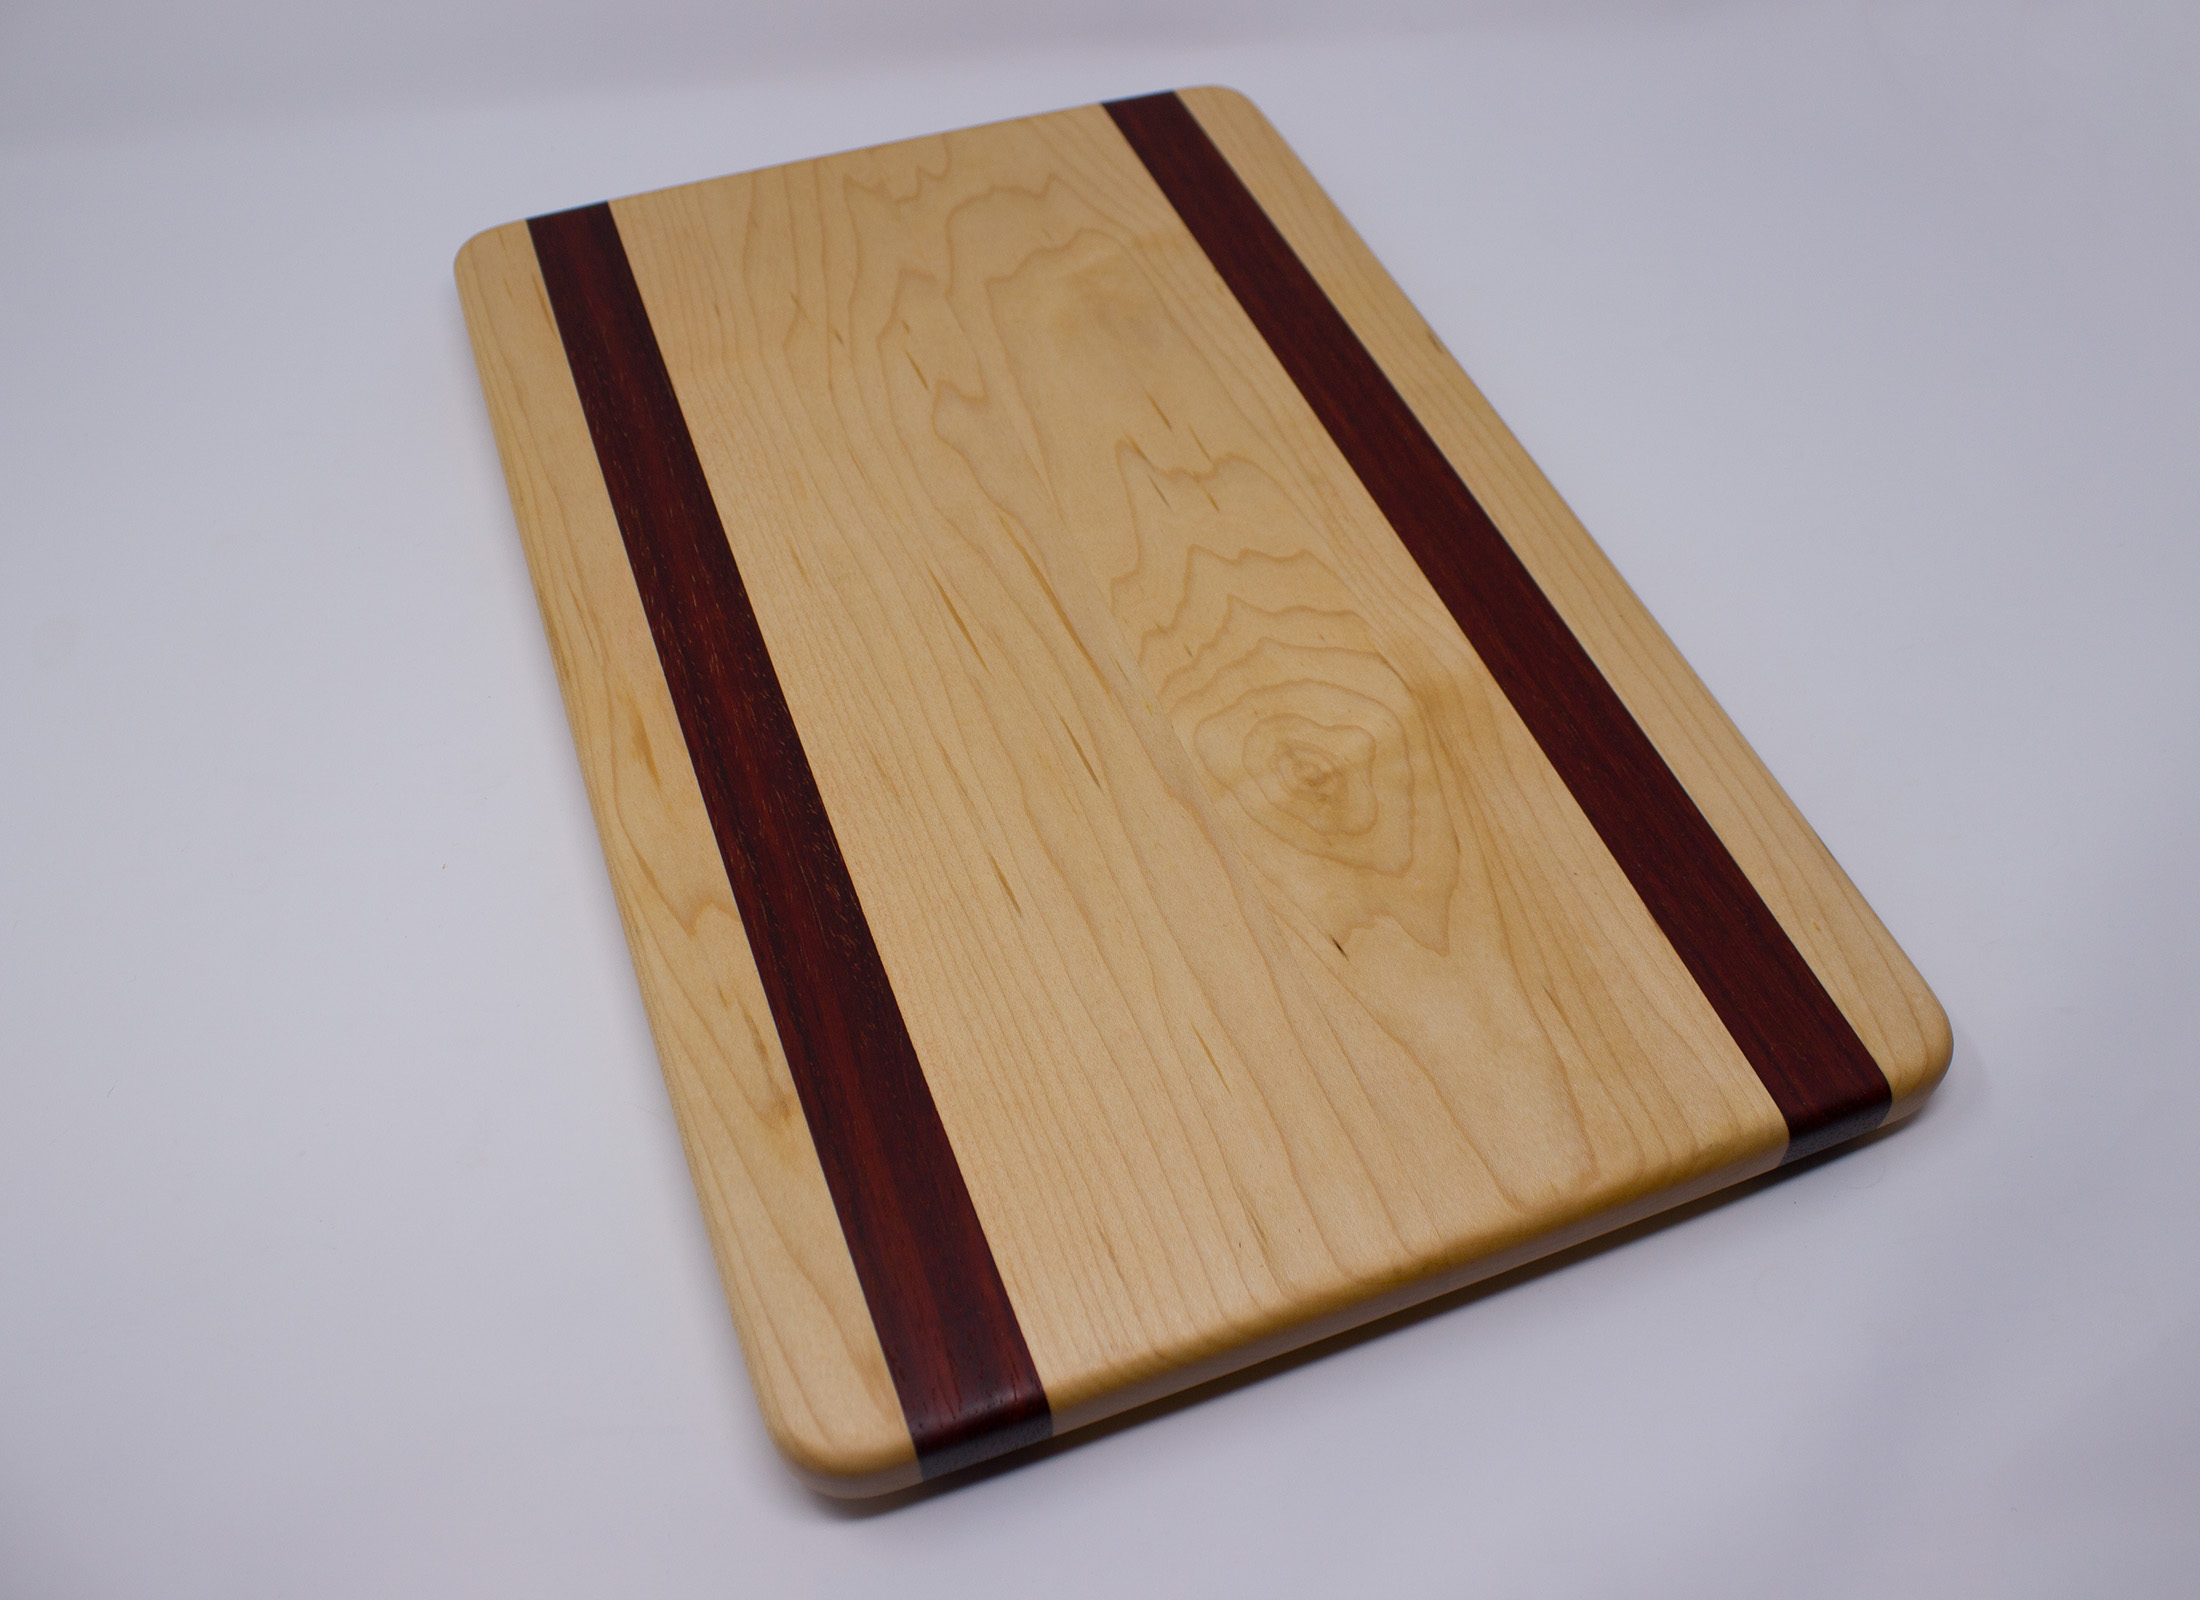 https://www.rockfordwoodcrafts.com/wp-content/uploads/Maple-with-Two-Large-Padauk-Stripes-Cutting-Board-Top-Head-On.jpg